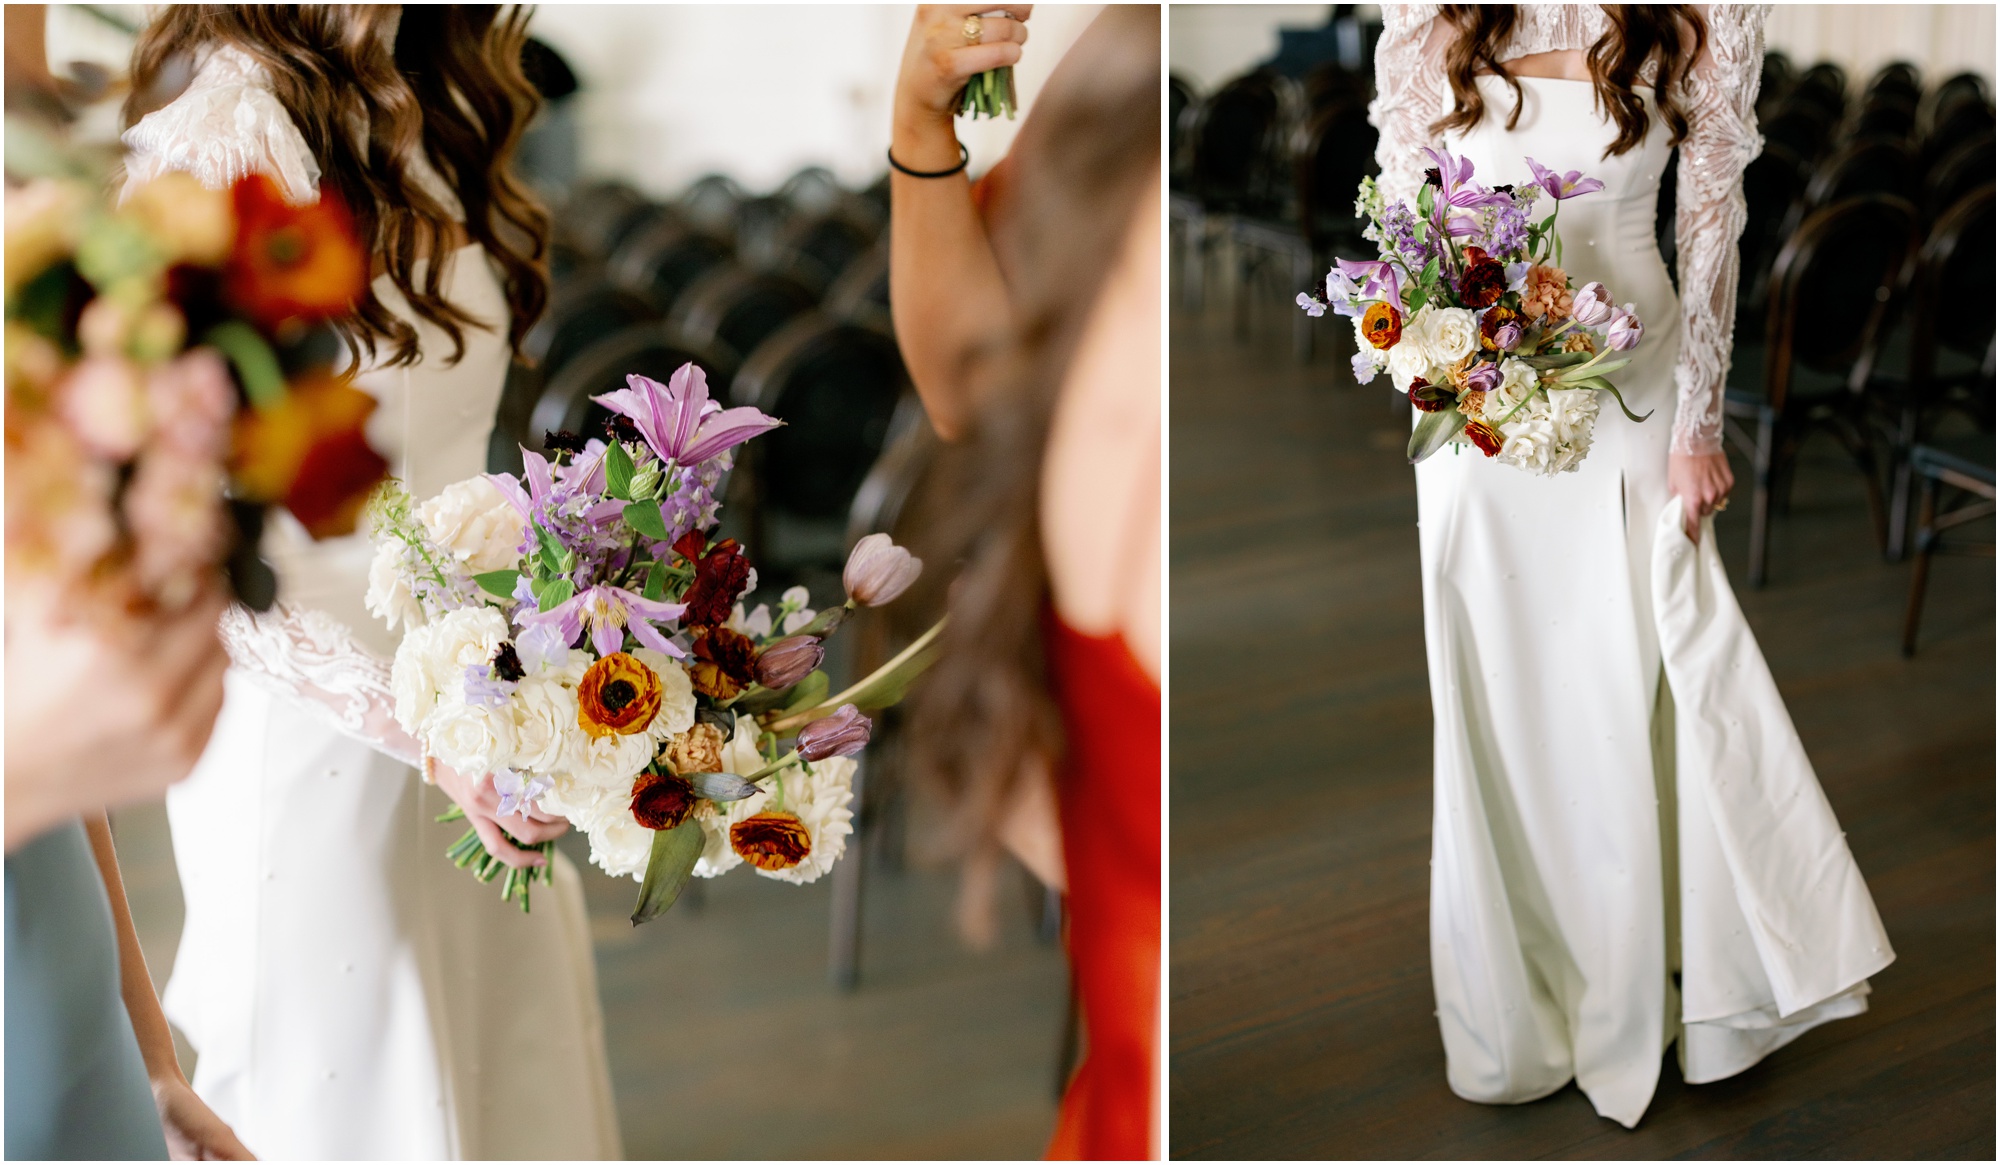 Bride with her colorful bouquet